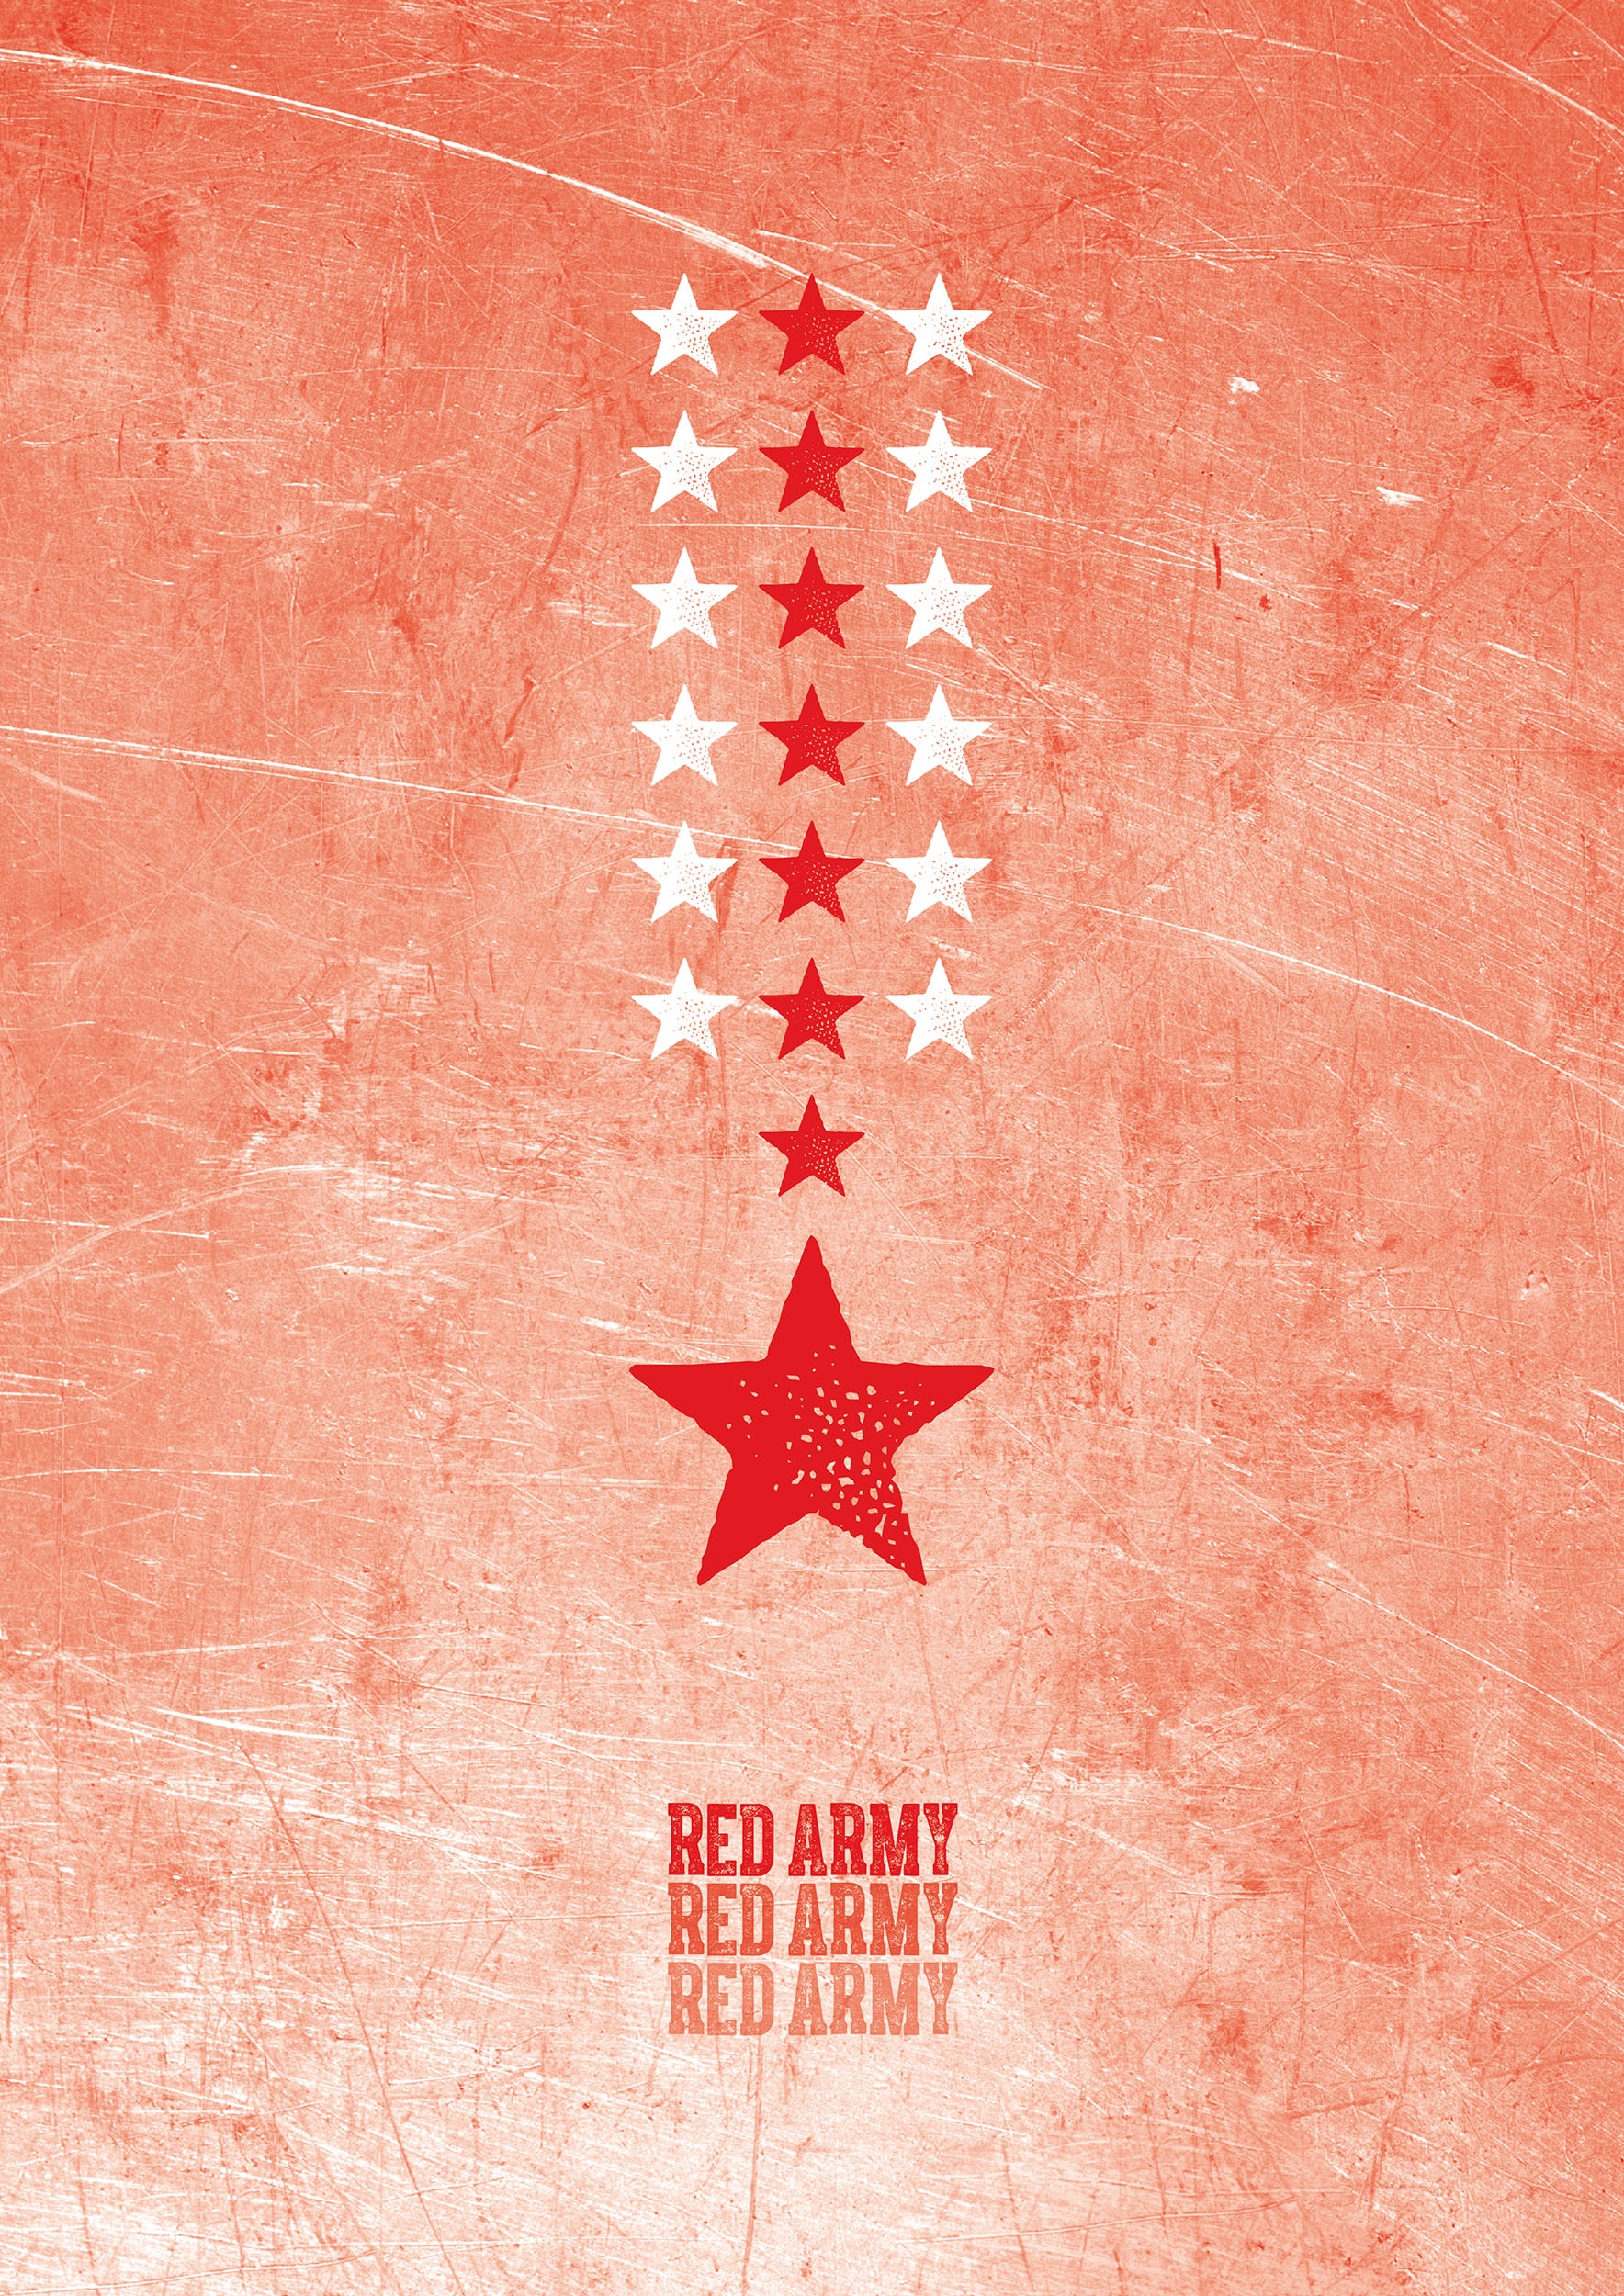 Manchester United, Red Army Print Poster Art and Gift Ideas Artwork